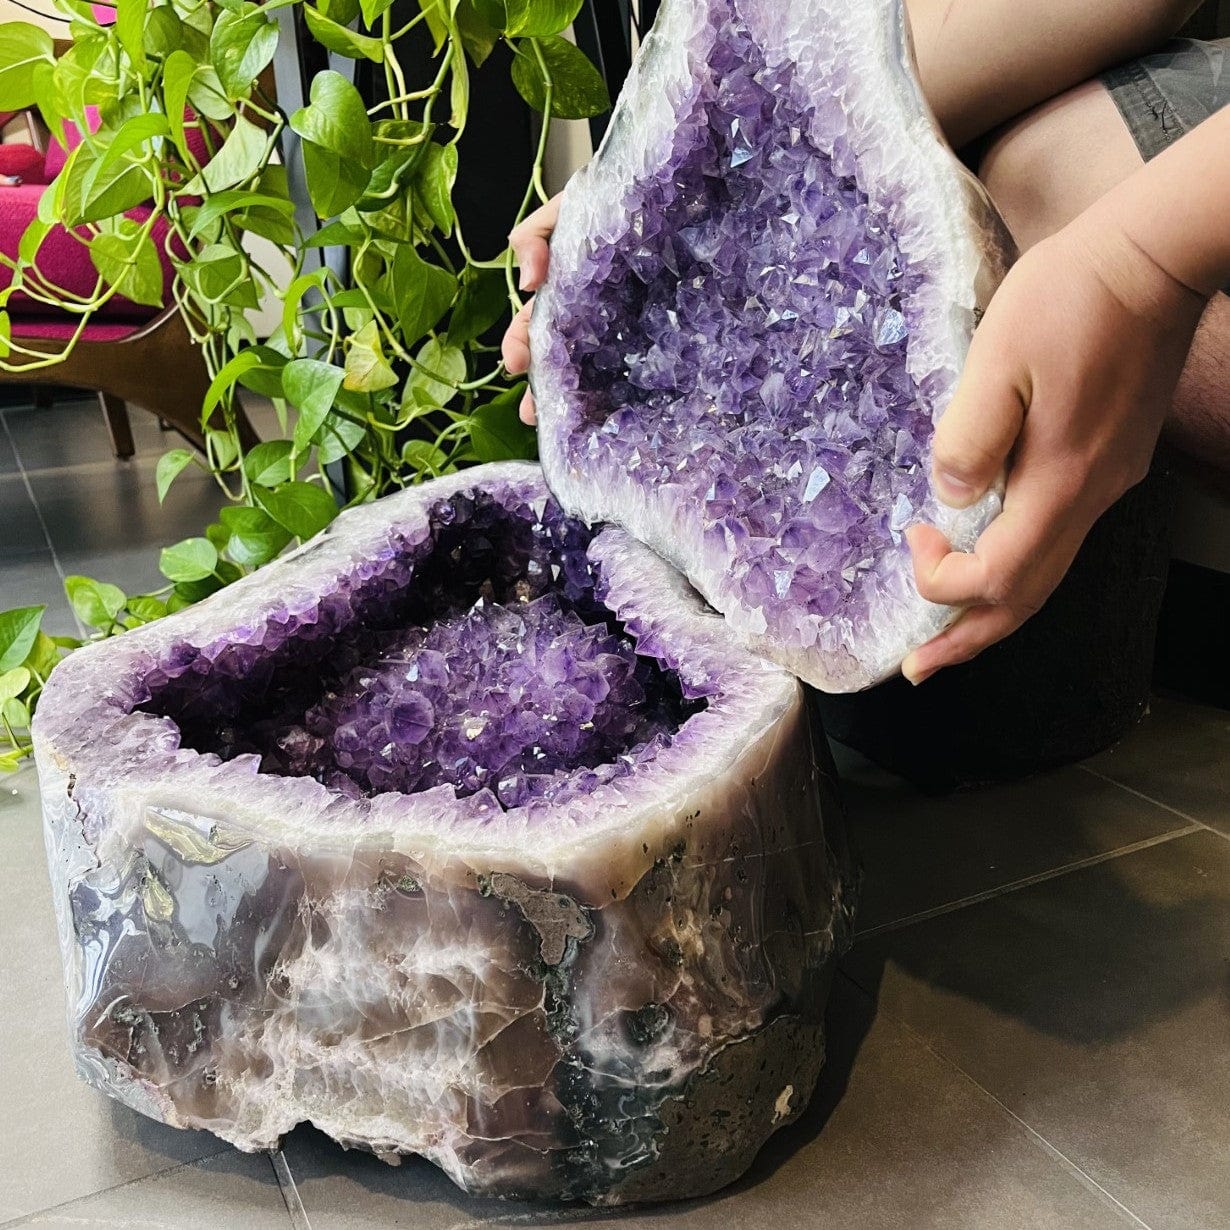 Amethyst Polished Cave Geode with a Lid opened up to reveal crystals inside